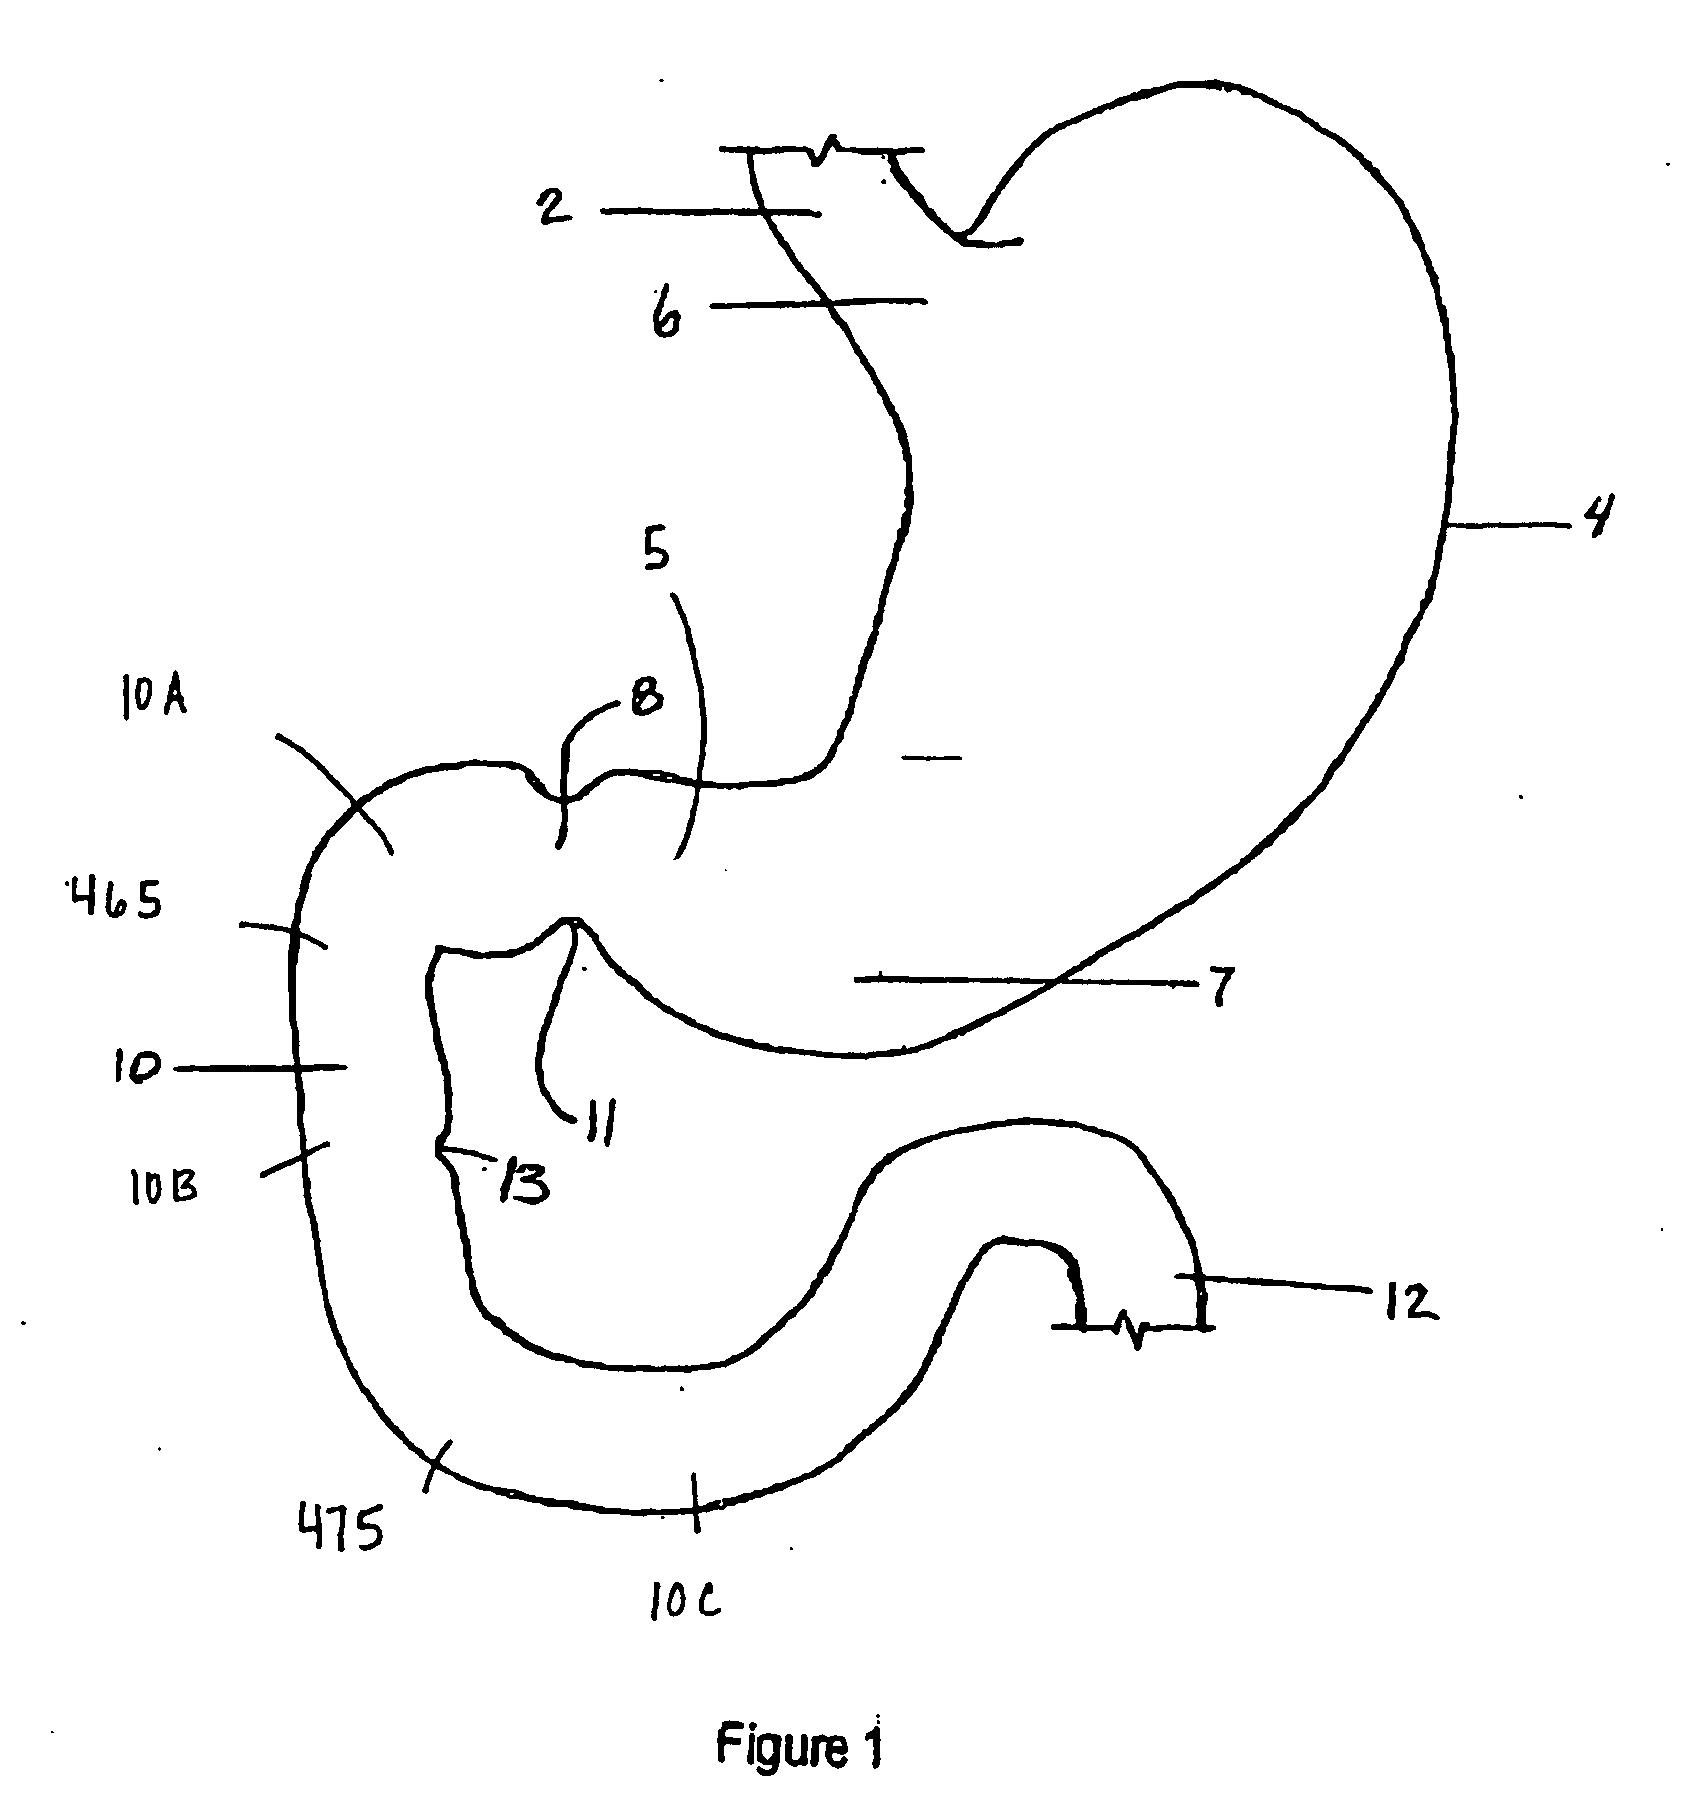 Methods and devices to curb appetite and/or reduce food intake